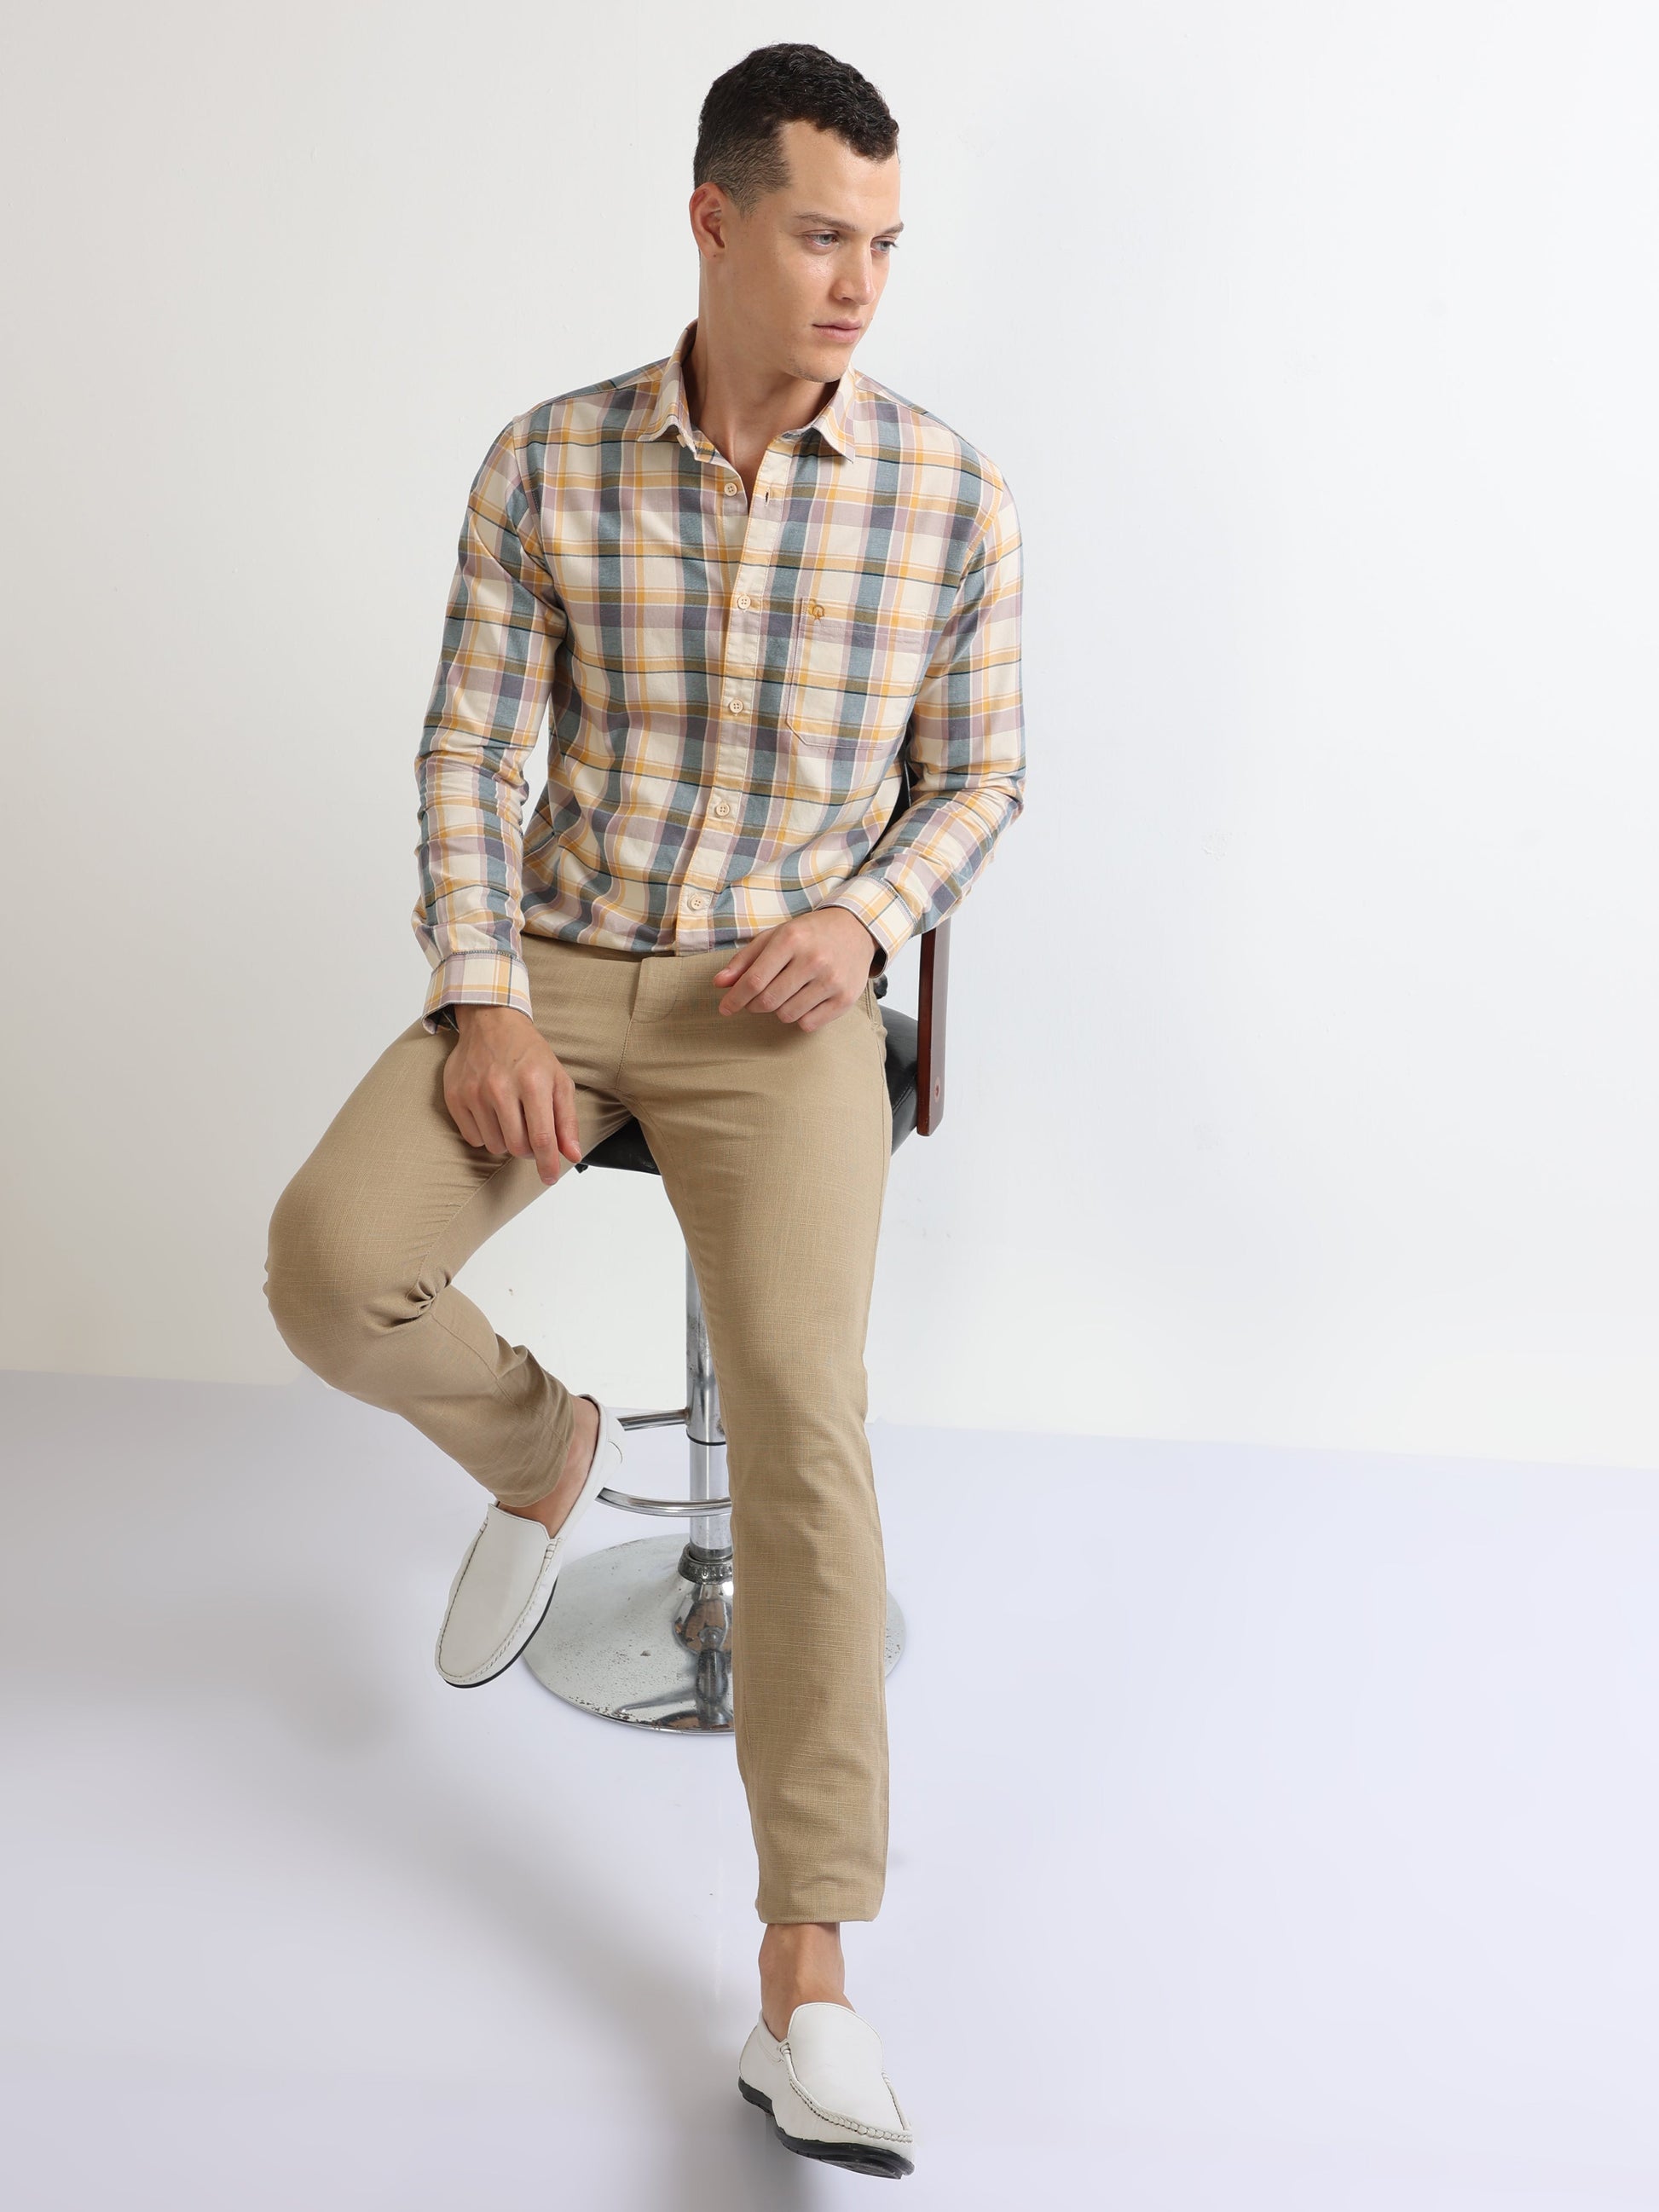 Buy Single Pocket Smart Casual Oxford Checked Shirt Online.